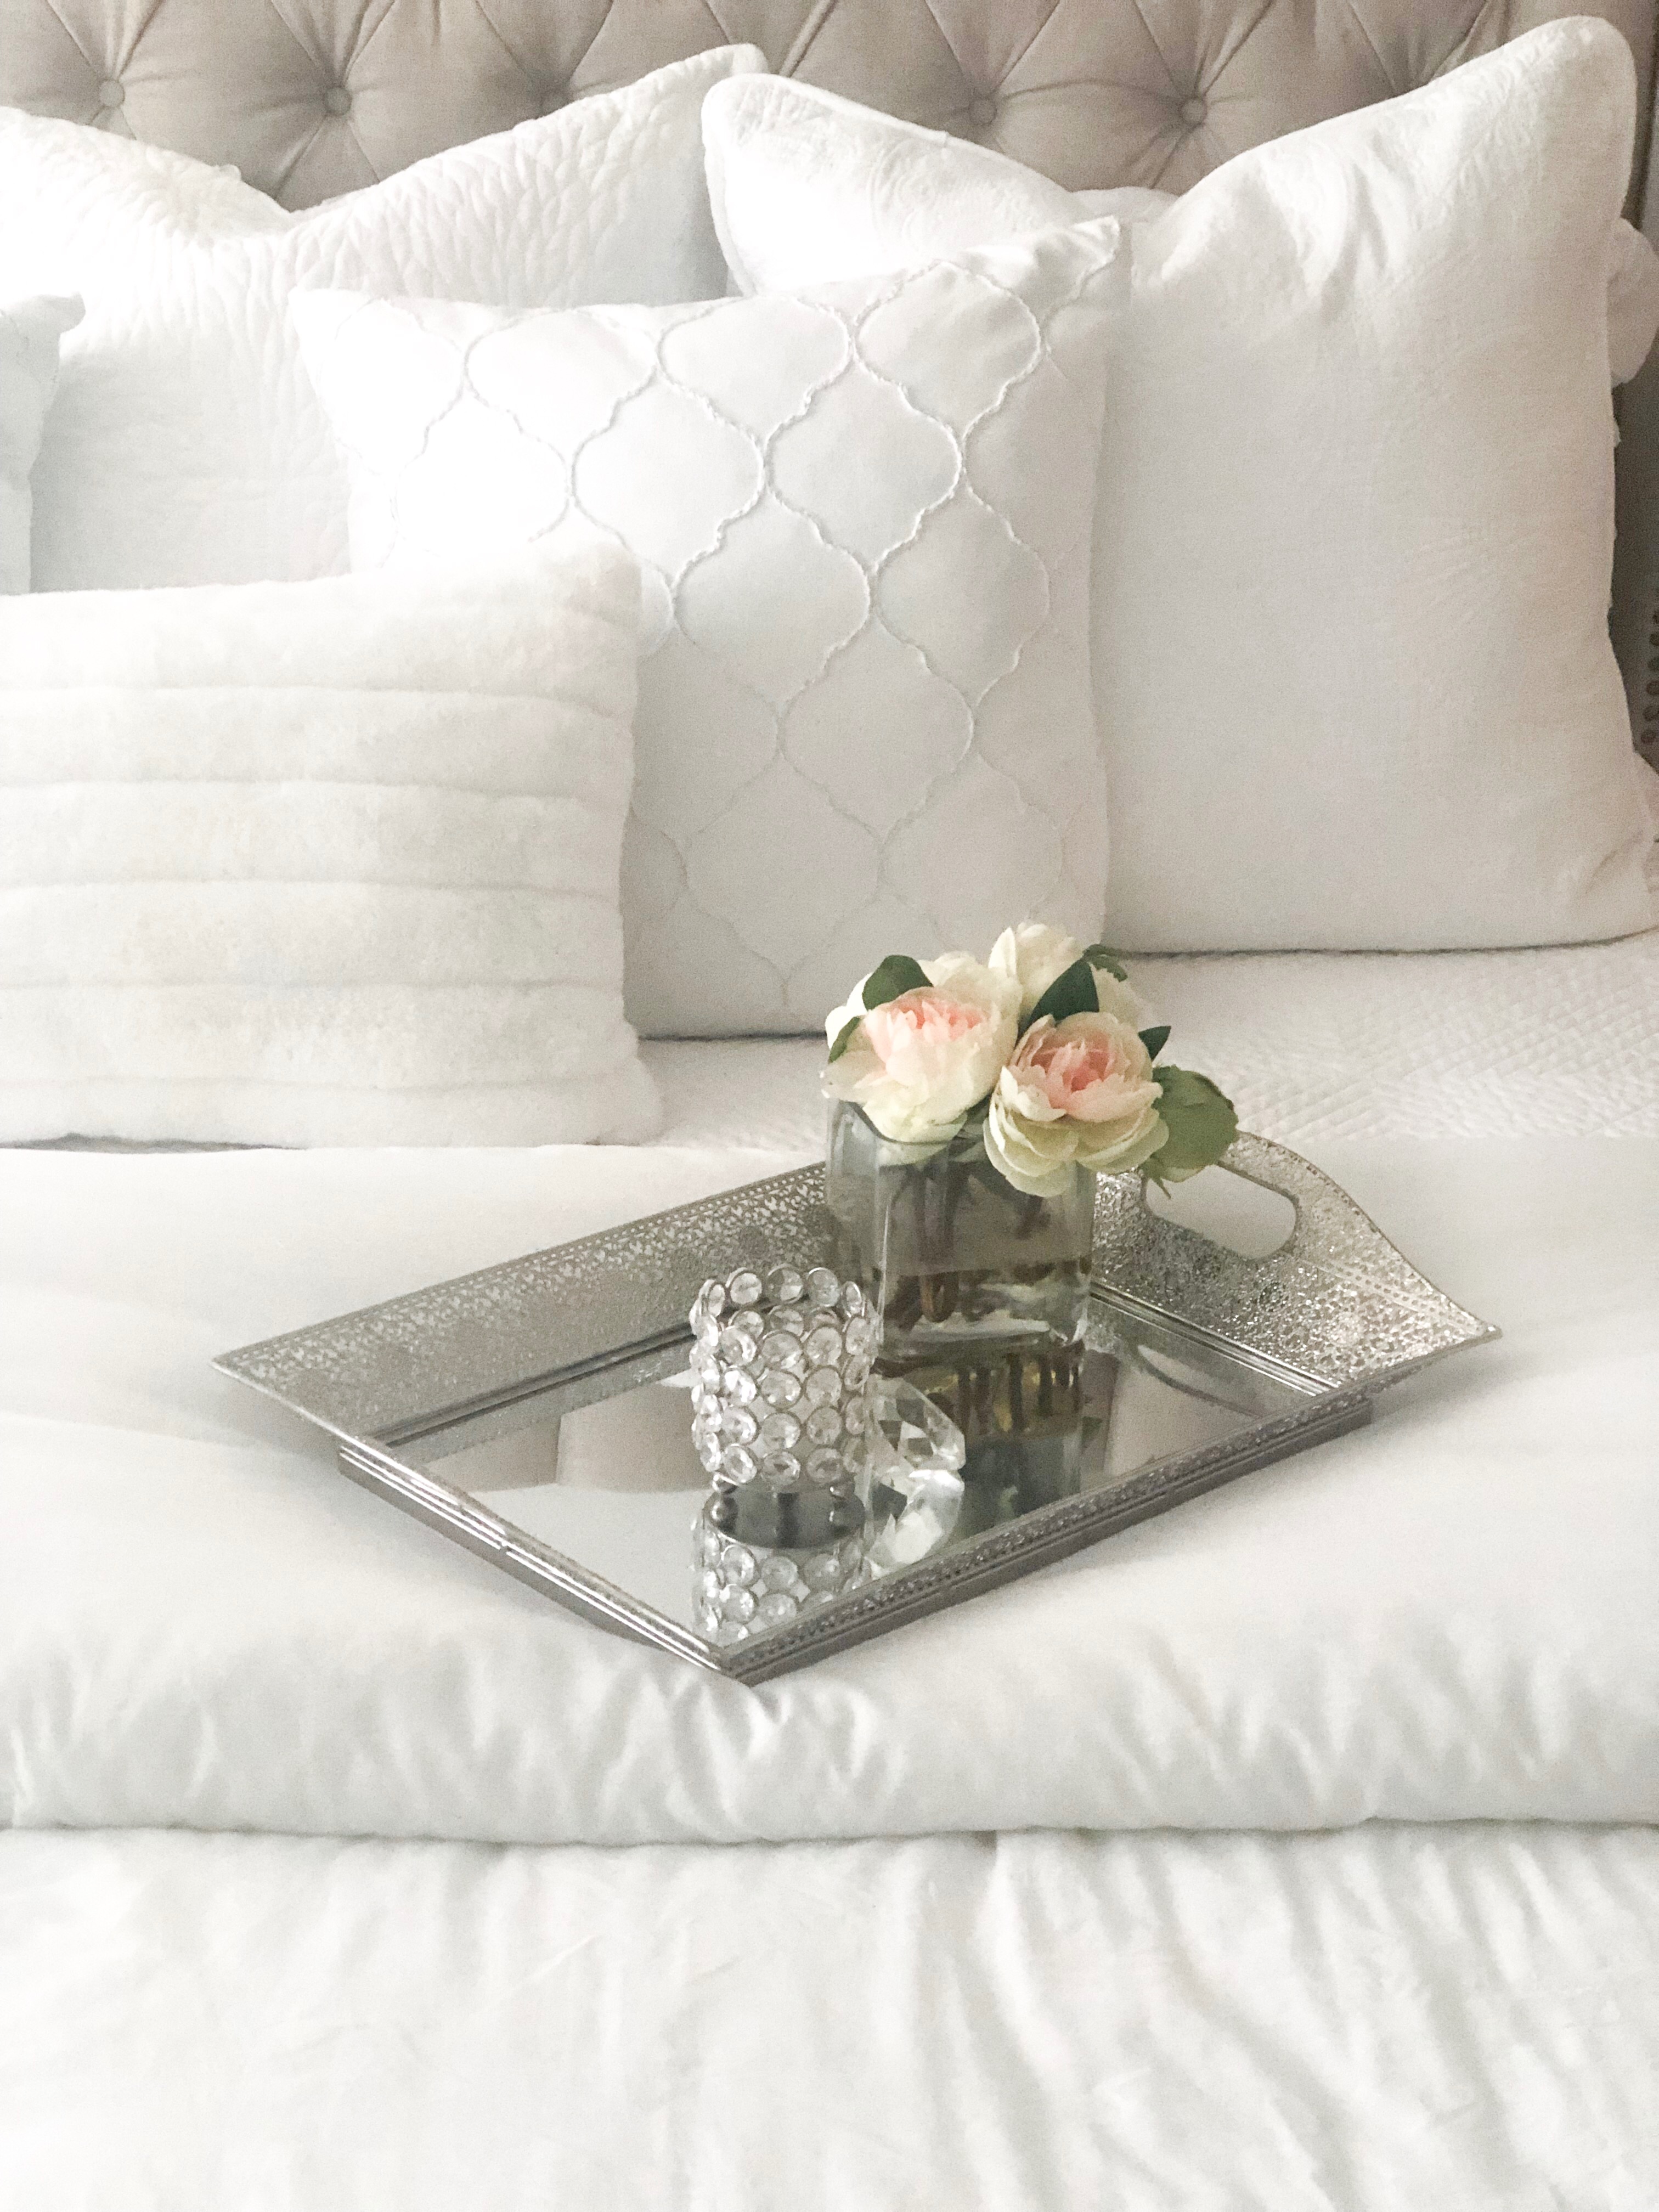 How to style a bed - HomeSense; Livin Life with Style